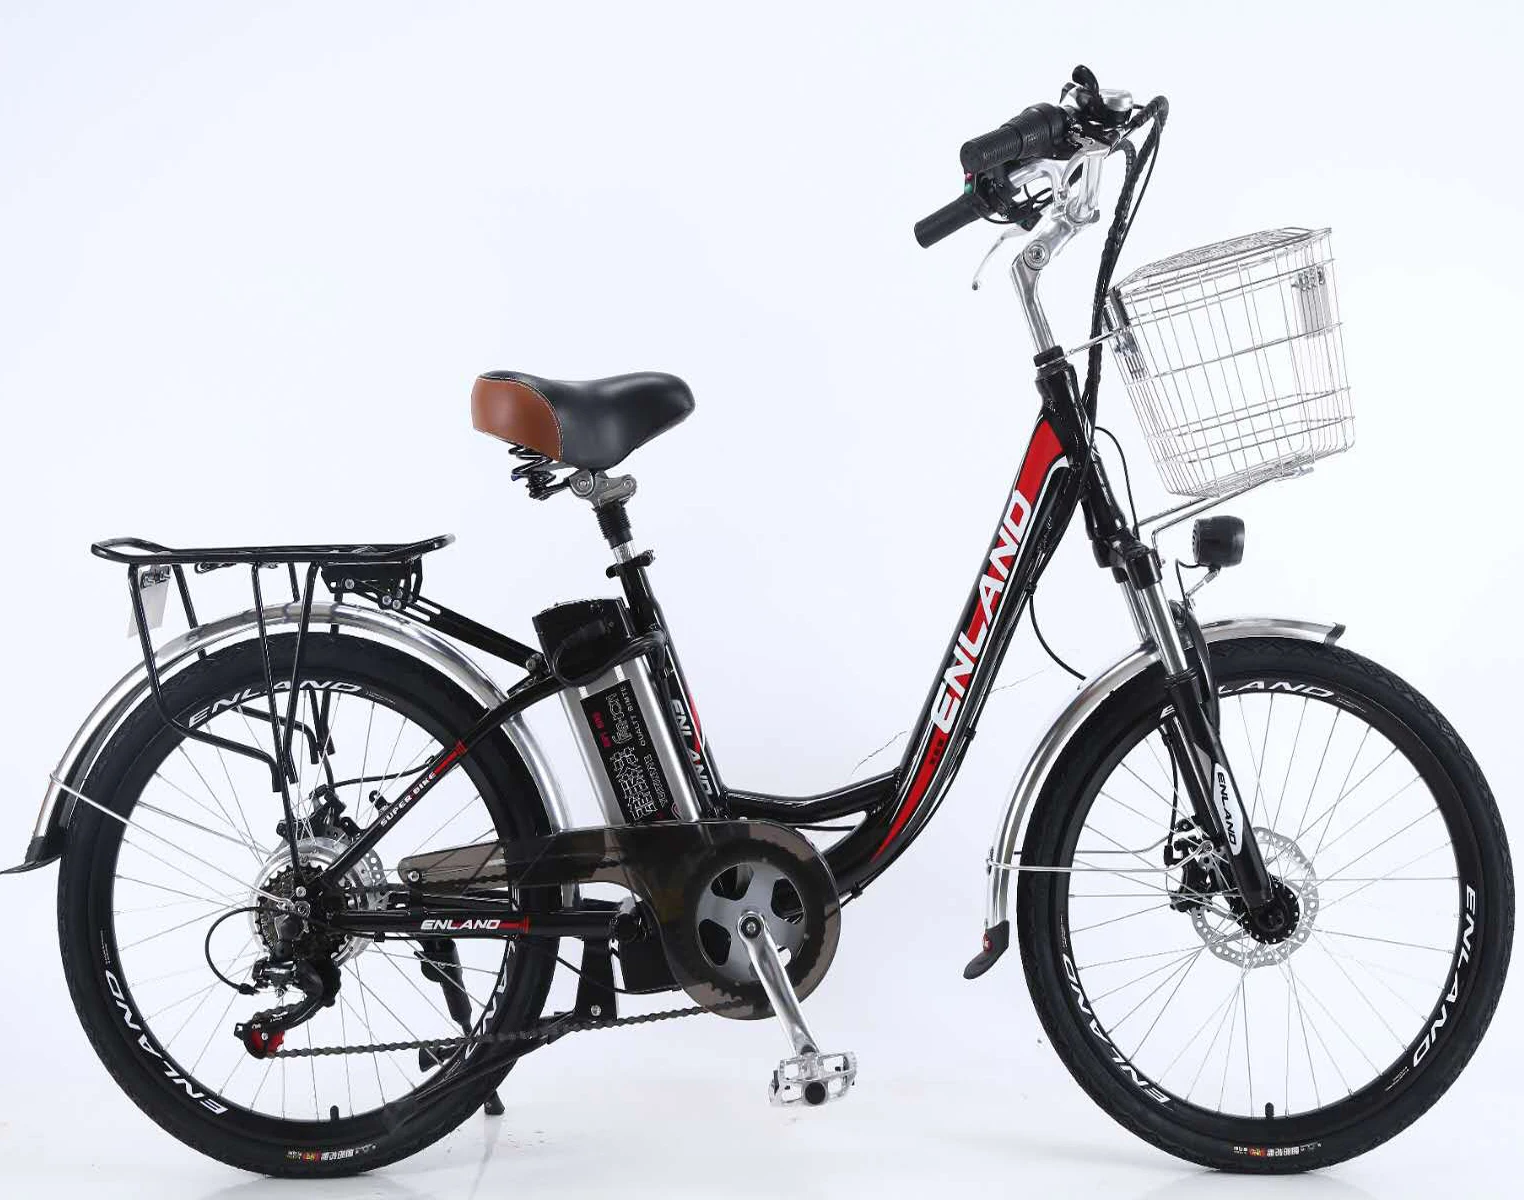 

Trade Assurance 24 Inches E Bike Electric Bicycle 200W 250W Street Legal Electric Bikes For Adults Two Wheels, Black/white/grey